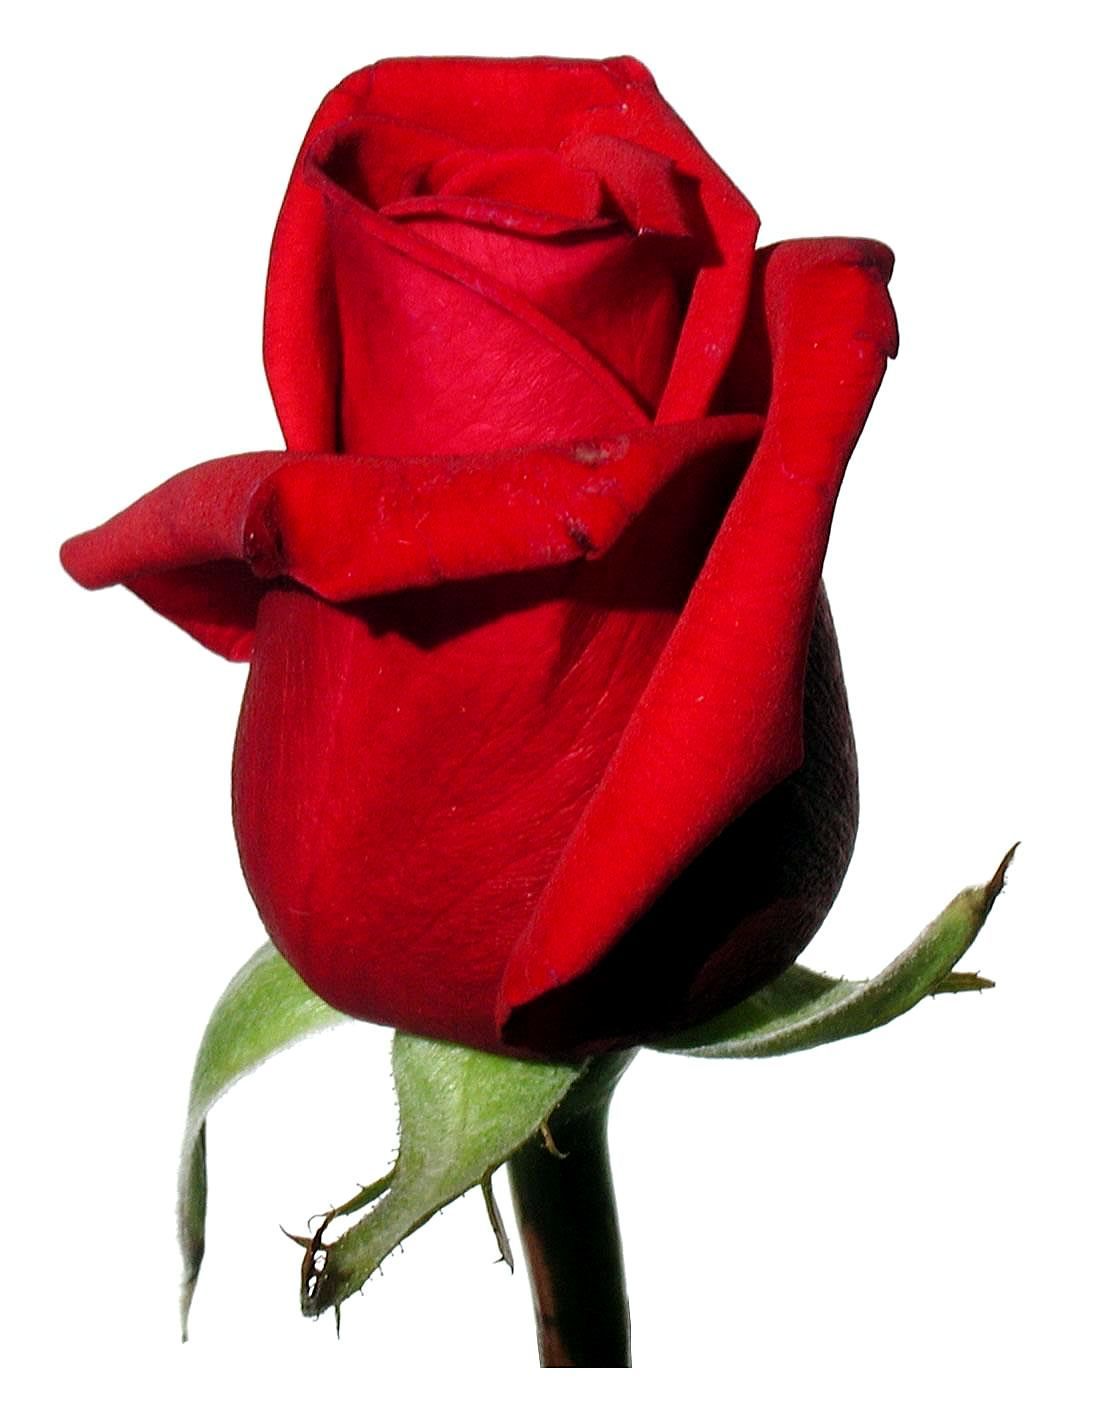 File:Rose red on white background.jpg - Wikimedia Commons